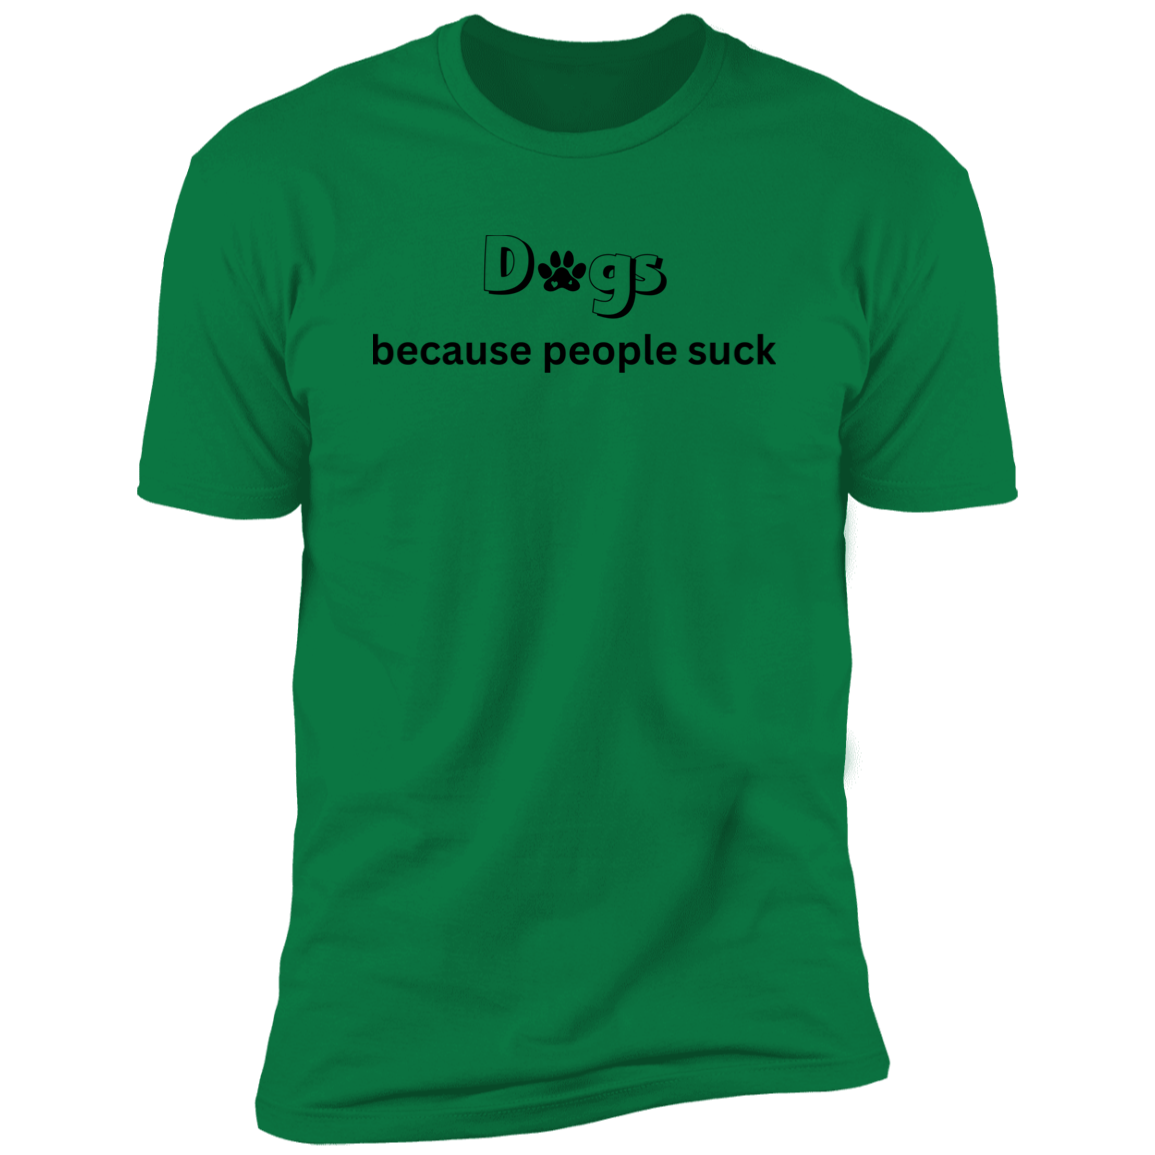 Dogs Because People Such t-shirt, funny dog shirt for humans, in kelly green